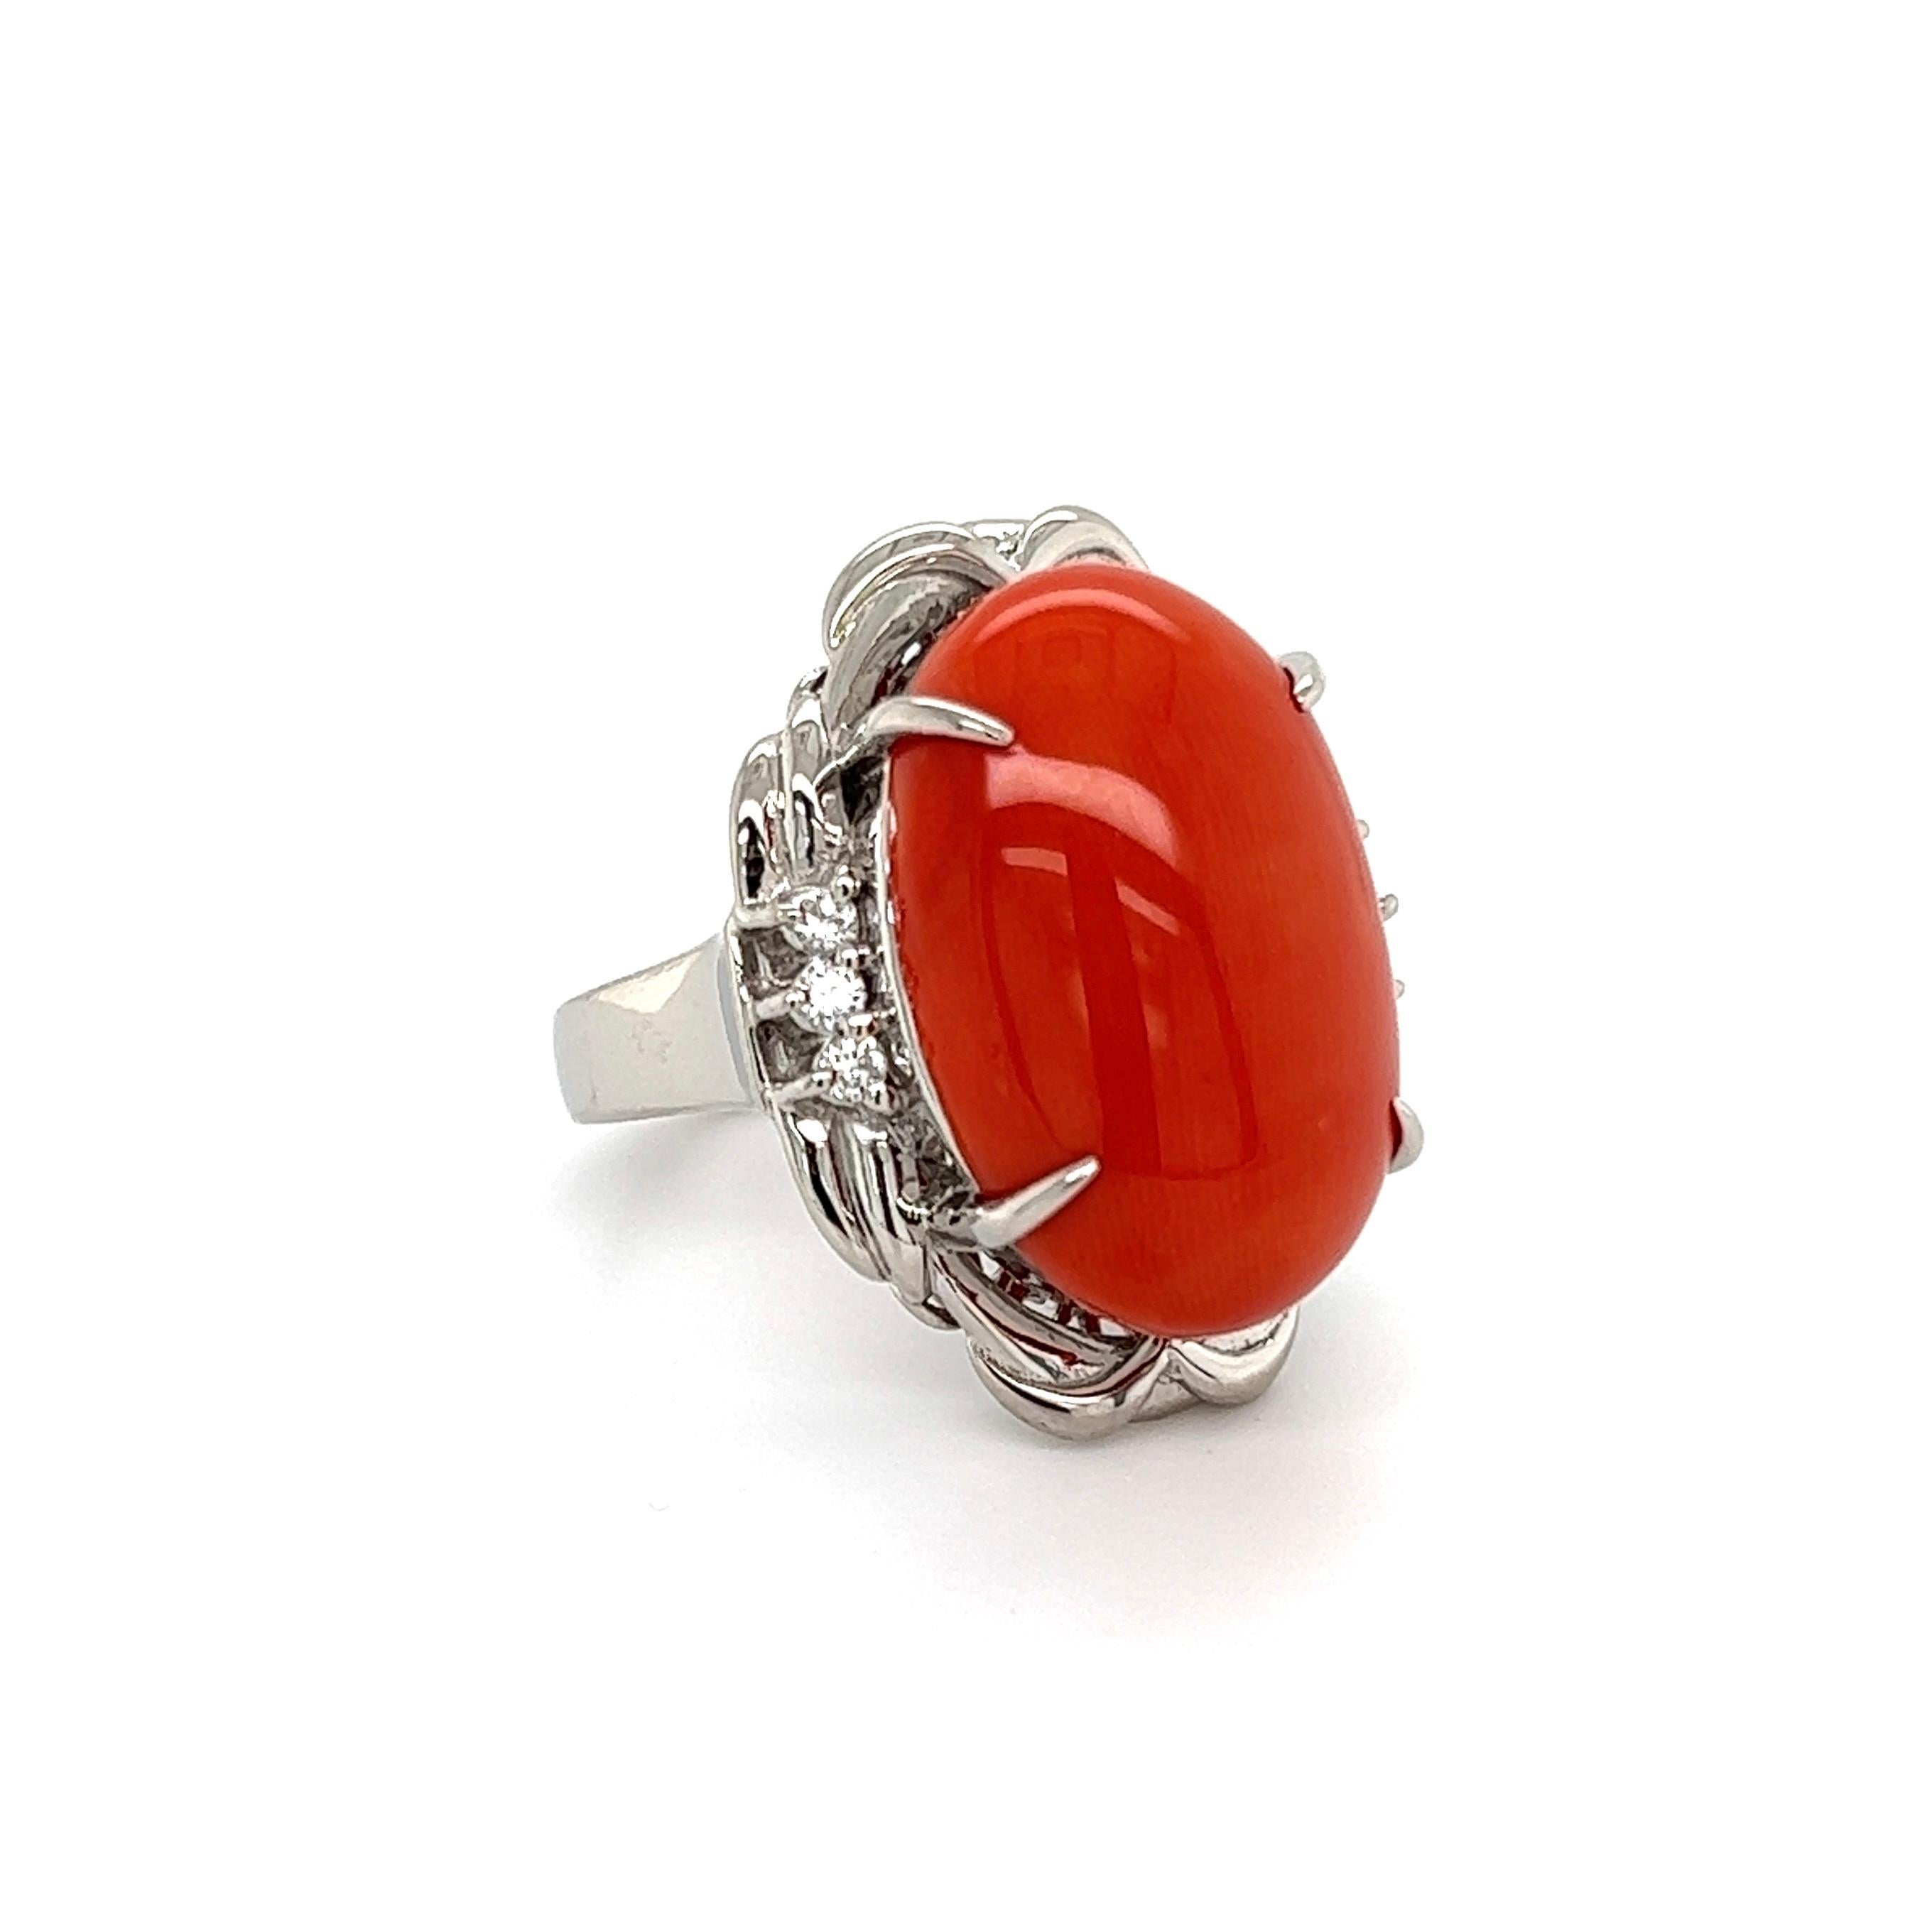 Simply Beautiful! Finely detailed Cabochon Red Coral and Diamond Cocktail Ring. Center securely set with an Awesome 12 Carat Cabochon Red Coral, accented by Diamonds, weighing approx. 0.16tcw. Hand crafted Platinum mounting. Approx. dimensions: